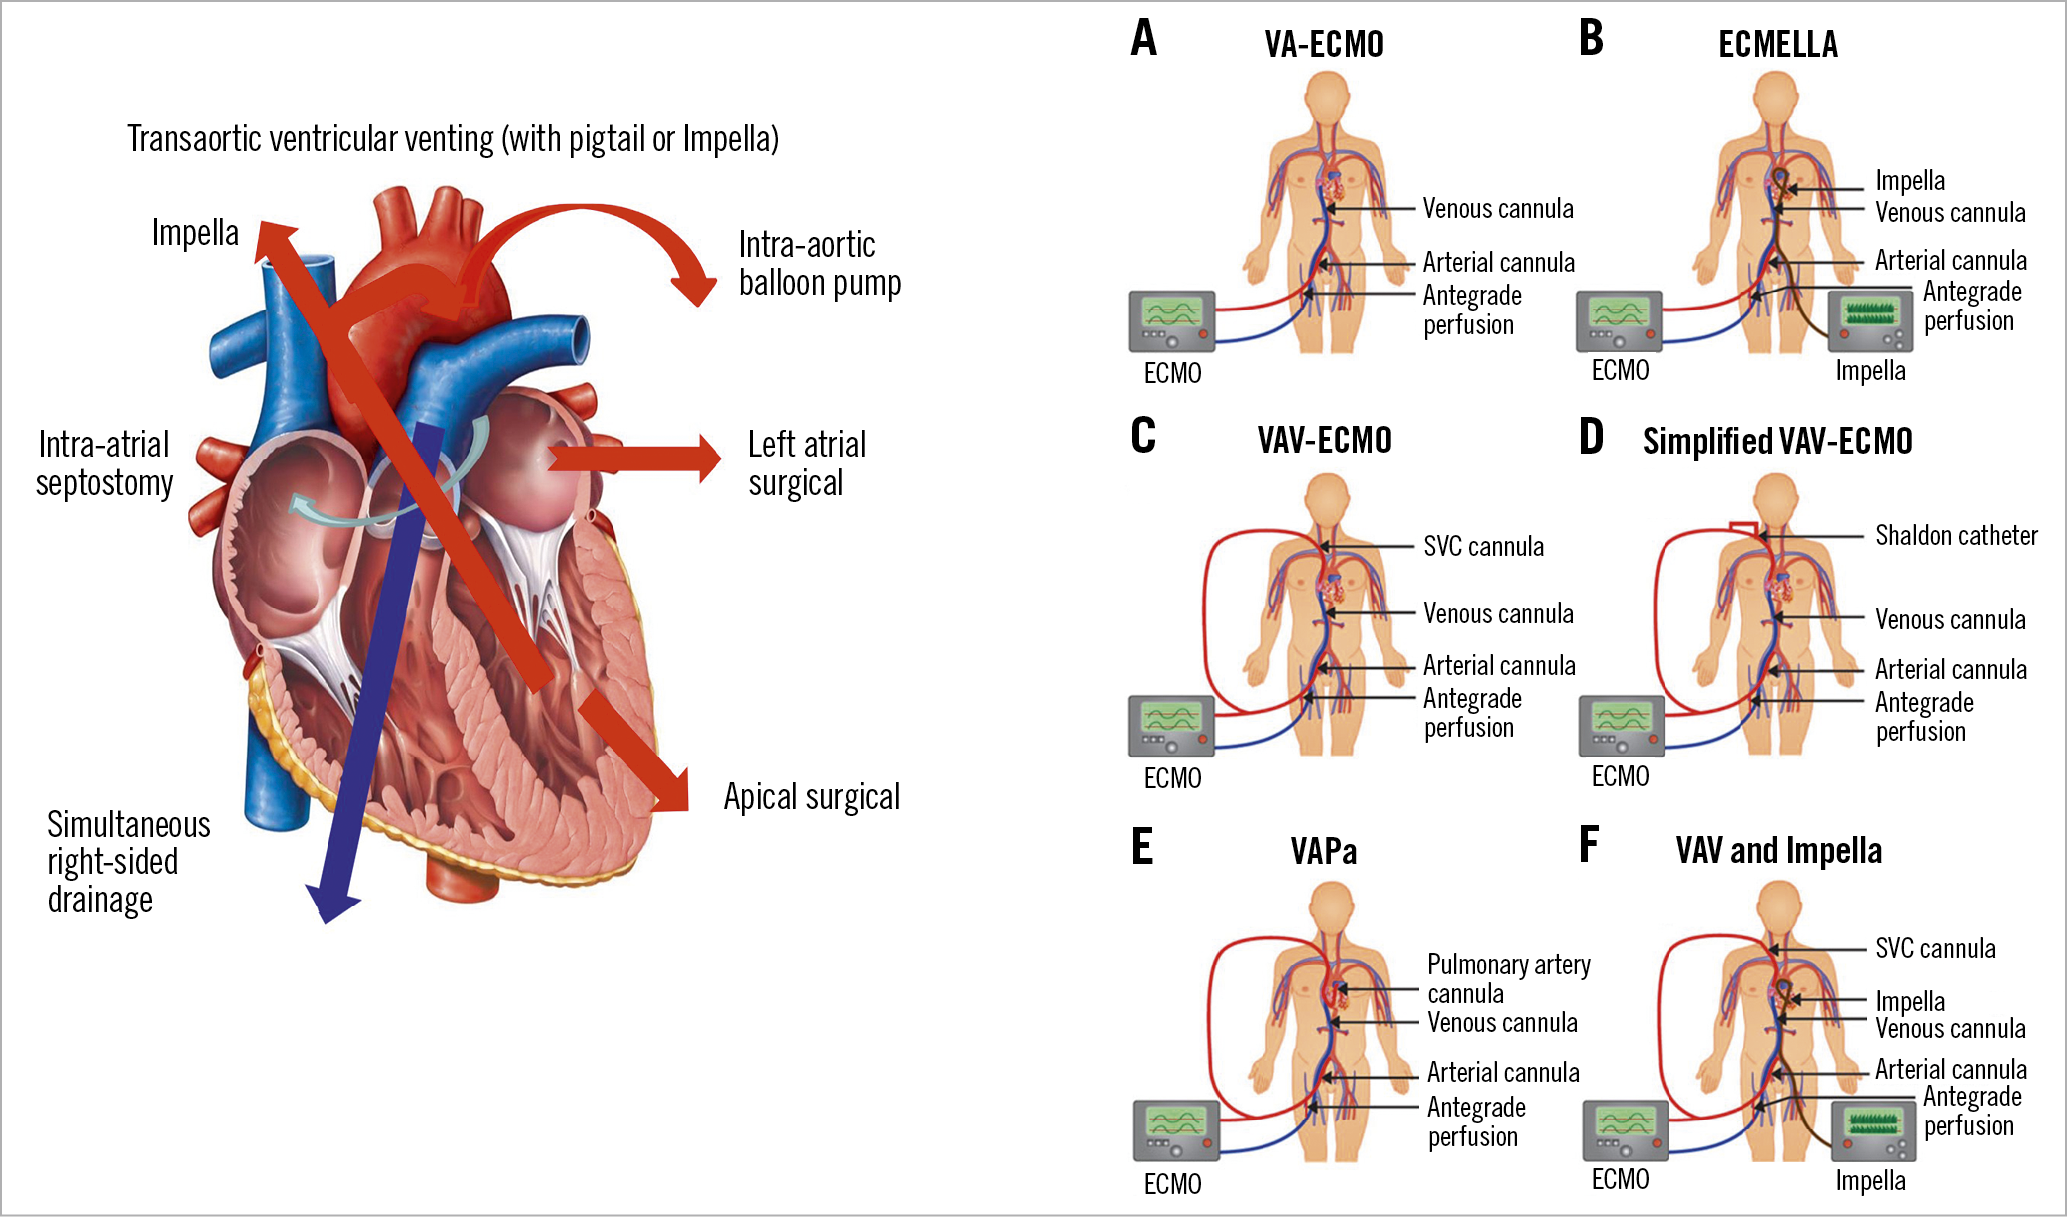 Figure 4. Left: considerations on potential surgical or percutaneous approaches to unload the left ventricle in the setting of venoarterial extracorporeal membrane oxygenation. Right: venoarterial extracorporeal membrane oxygenation and upgrades in cardiogenic shock and lung failure.